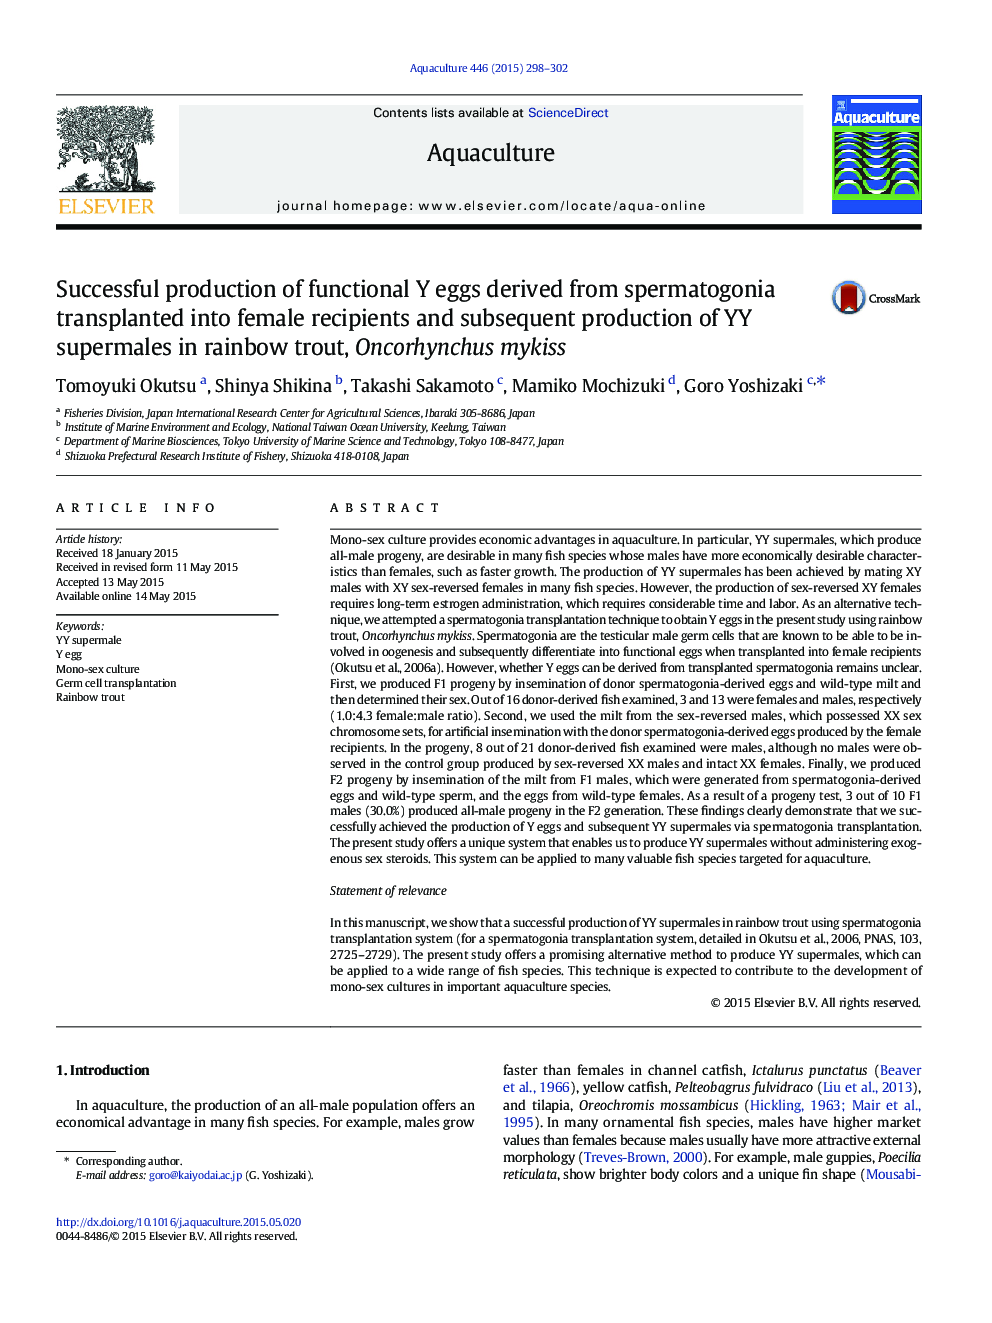 Successful production of functional Y eggs derived from spermatogonia transplanted into female recipients and subsequent production of YY supermales in rainbow trout, Oncorhynchus mykiss